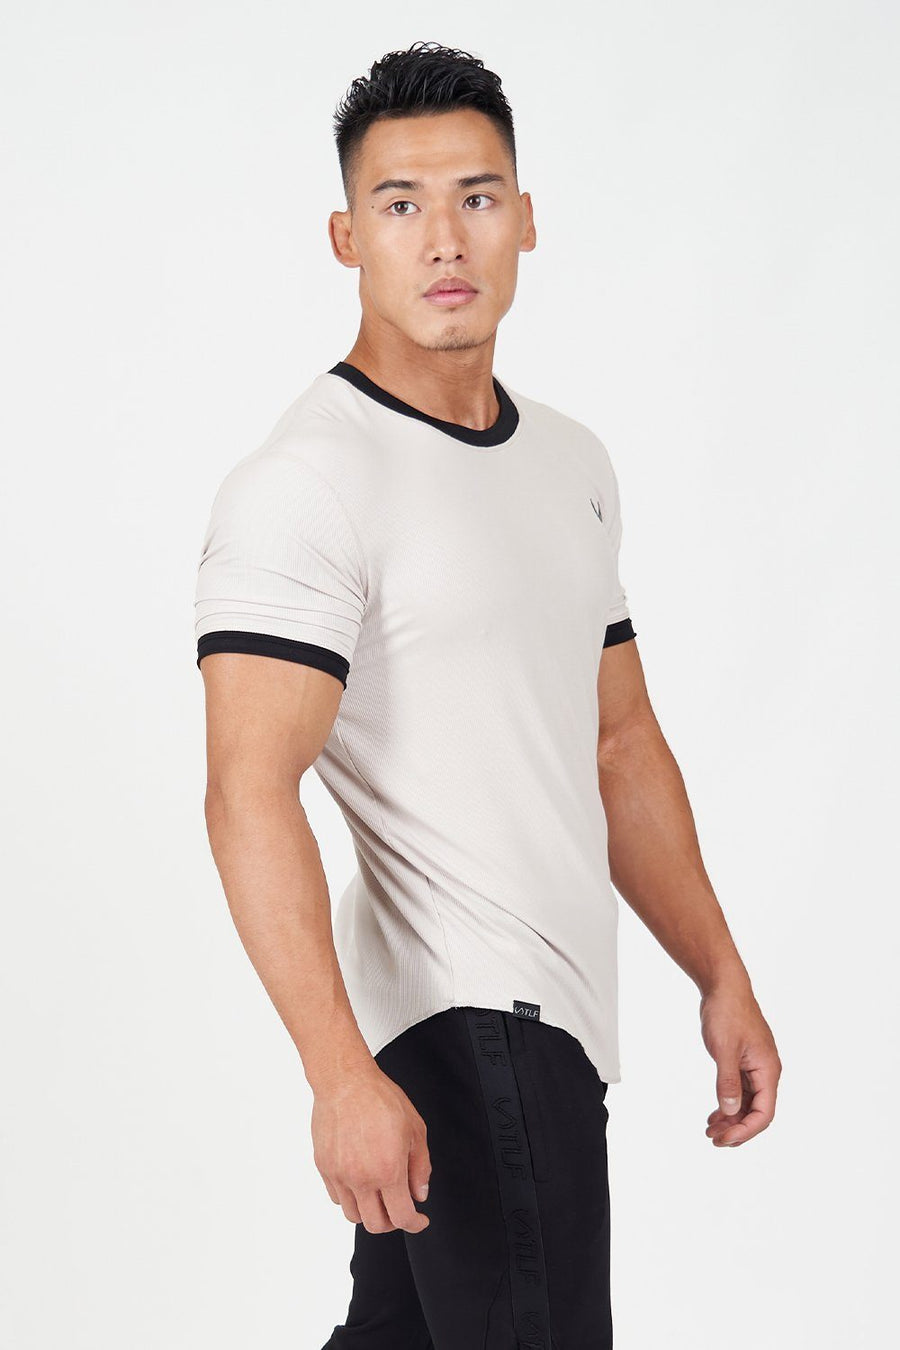 TLF Surge Classic Tee | Men's Ribbed Muscle Shirt – White - 4